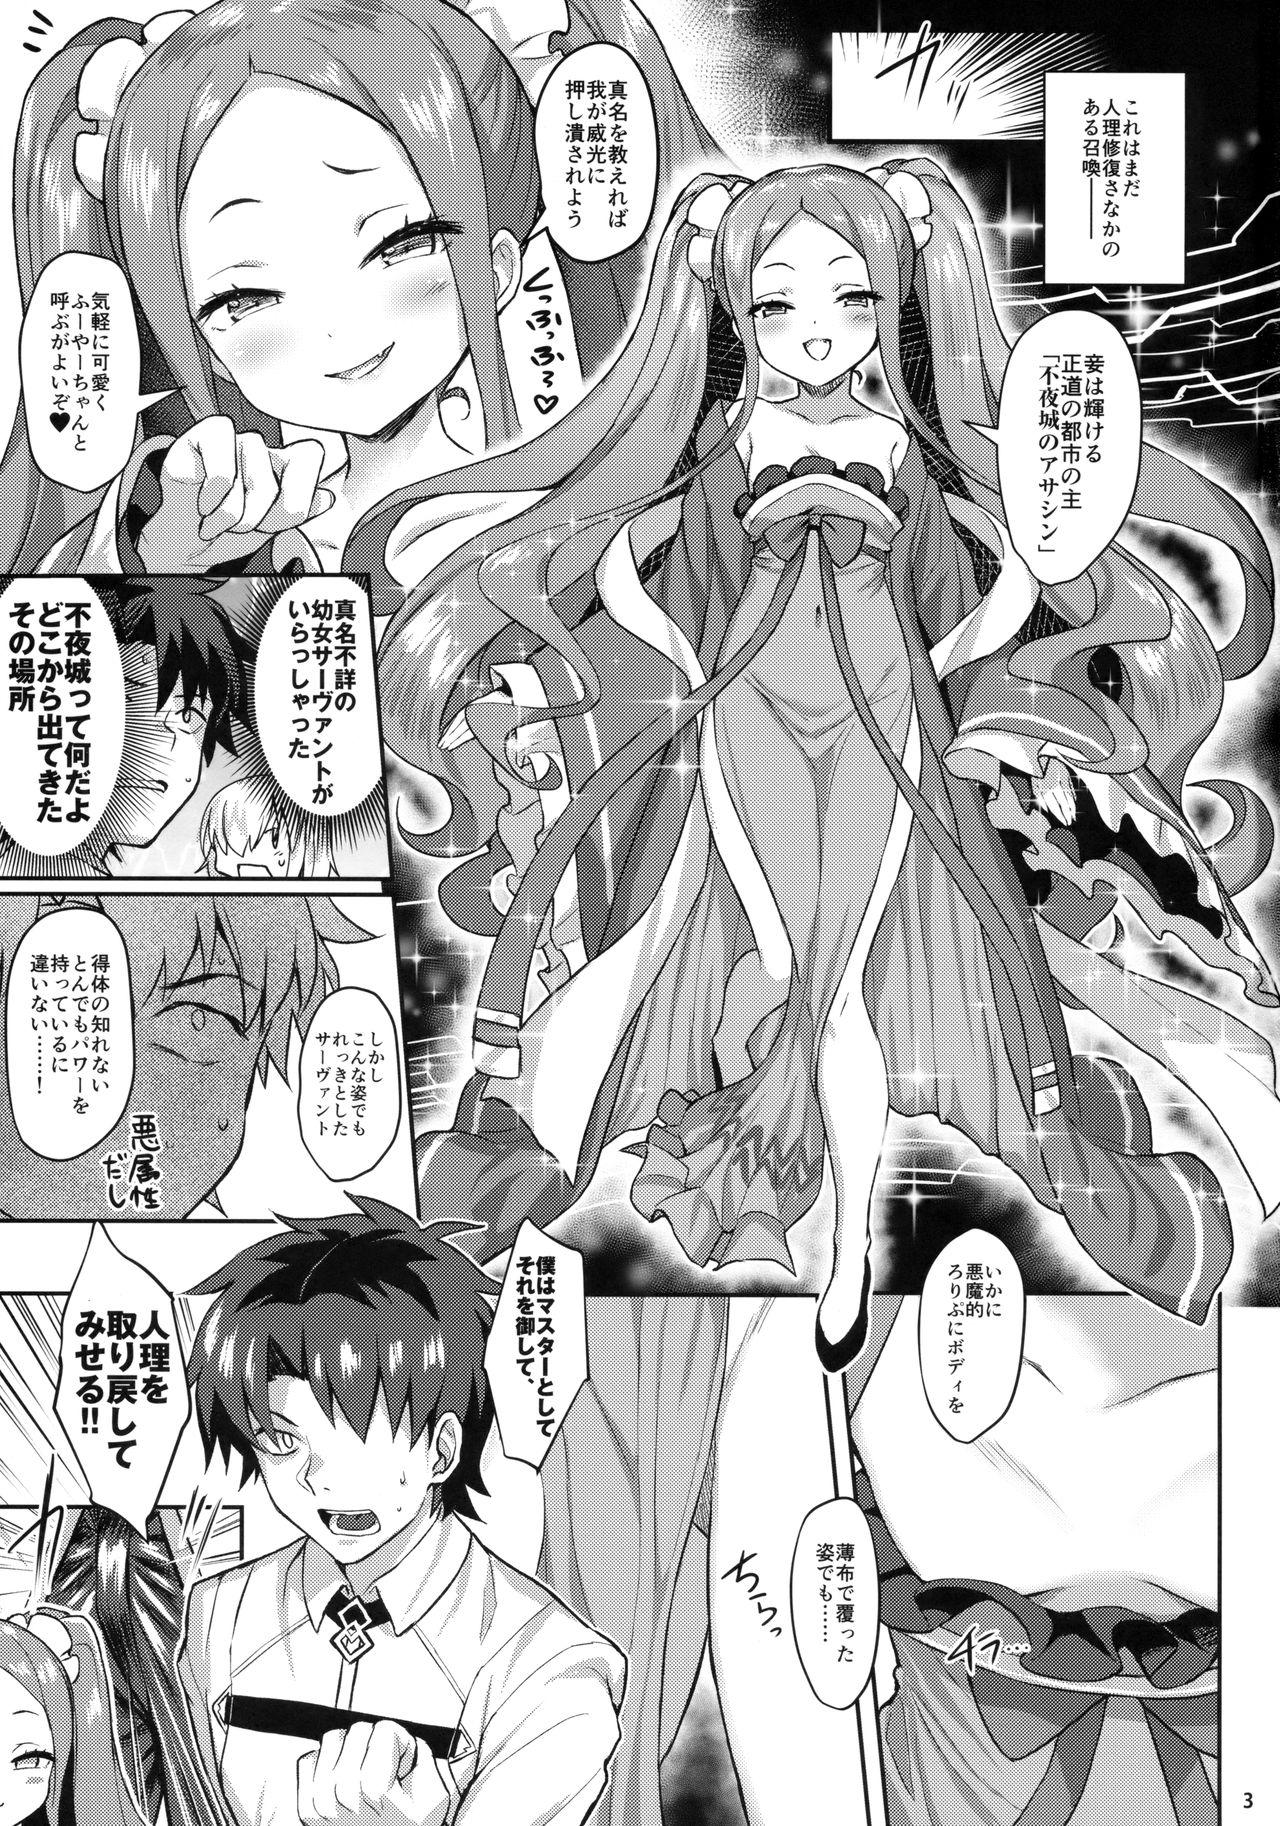 Gay Solo Fuya Syndrome - Sleepless Syndrome - Fate grand order Interracial Hardcore - Page 2